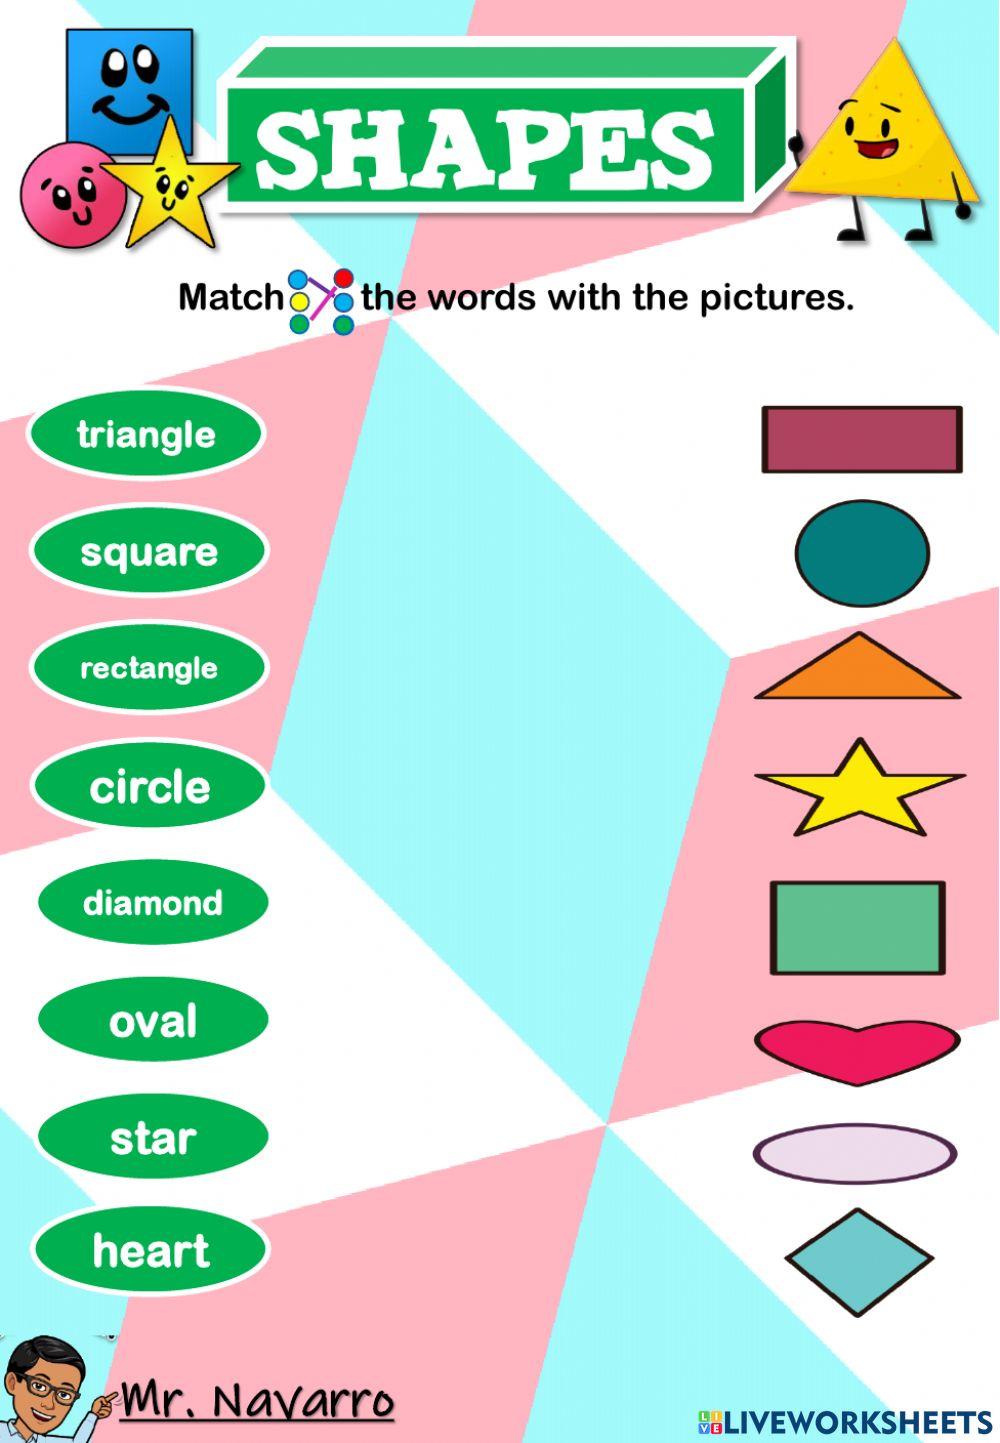 Shapes (Match the words with the pictures)